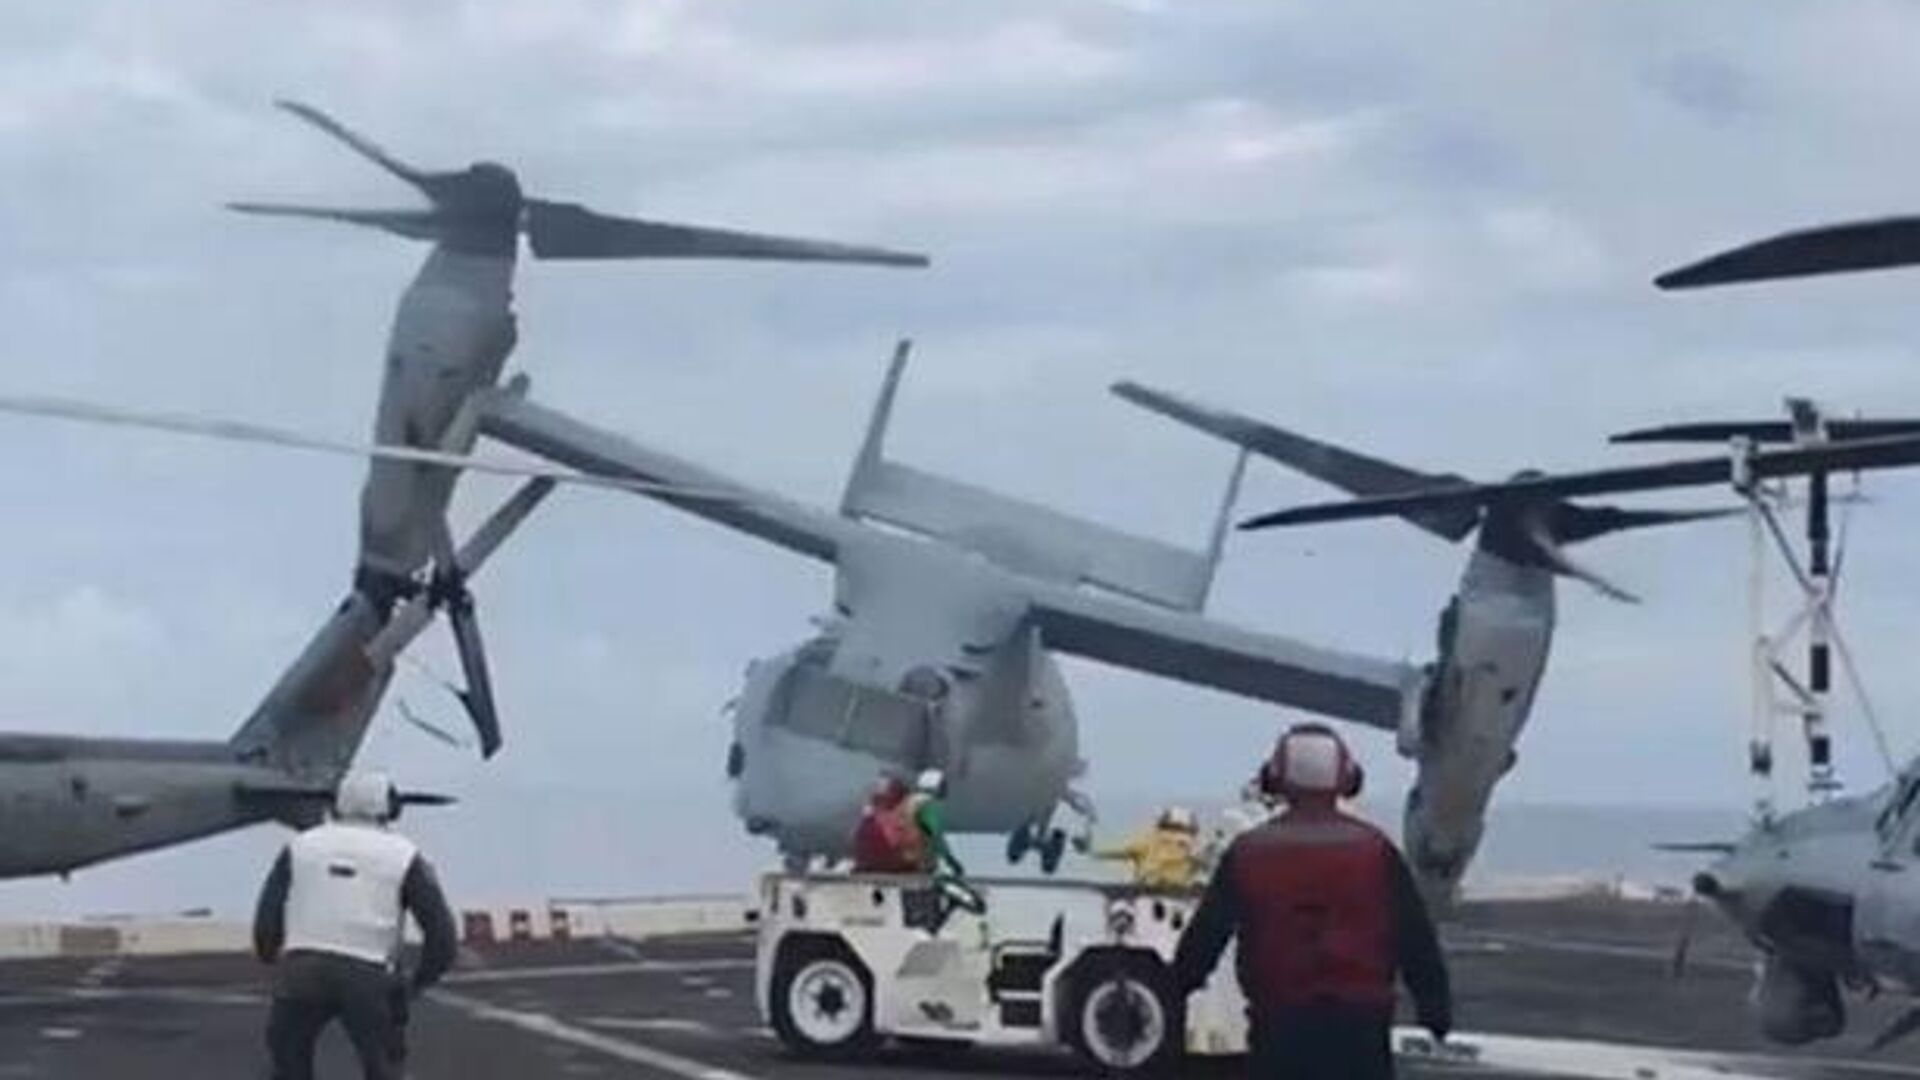 The MV-22 Osprey helicopter crashed over the side of a US warship in 2017 with deadly consequences - Sputnik International, 1920, 28.12.2023